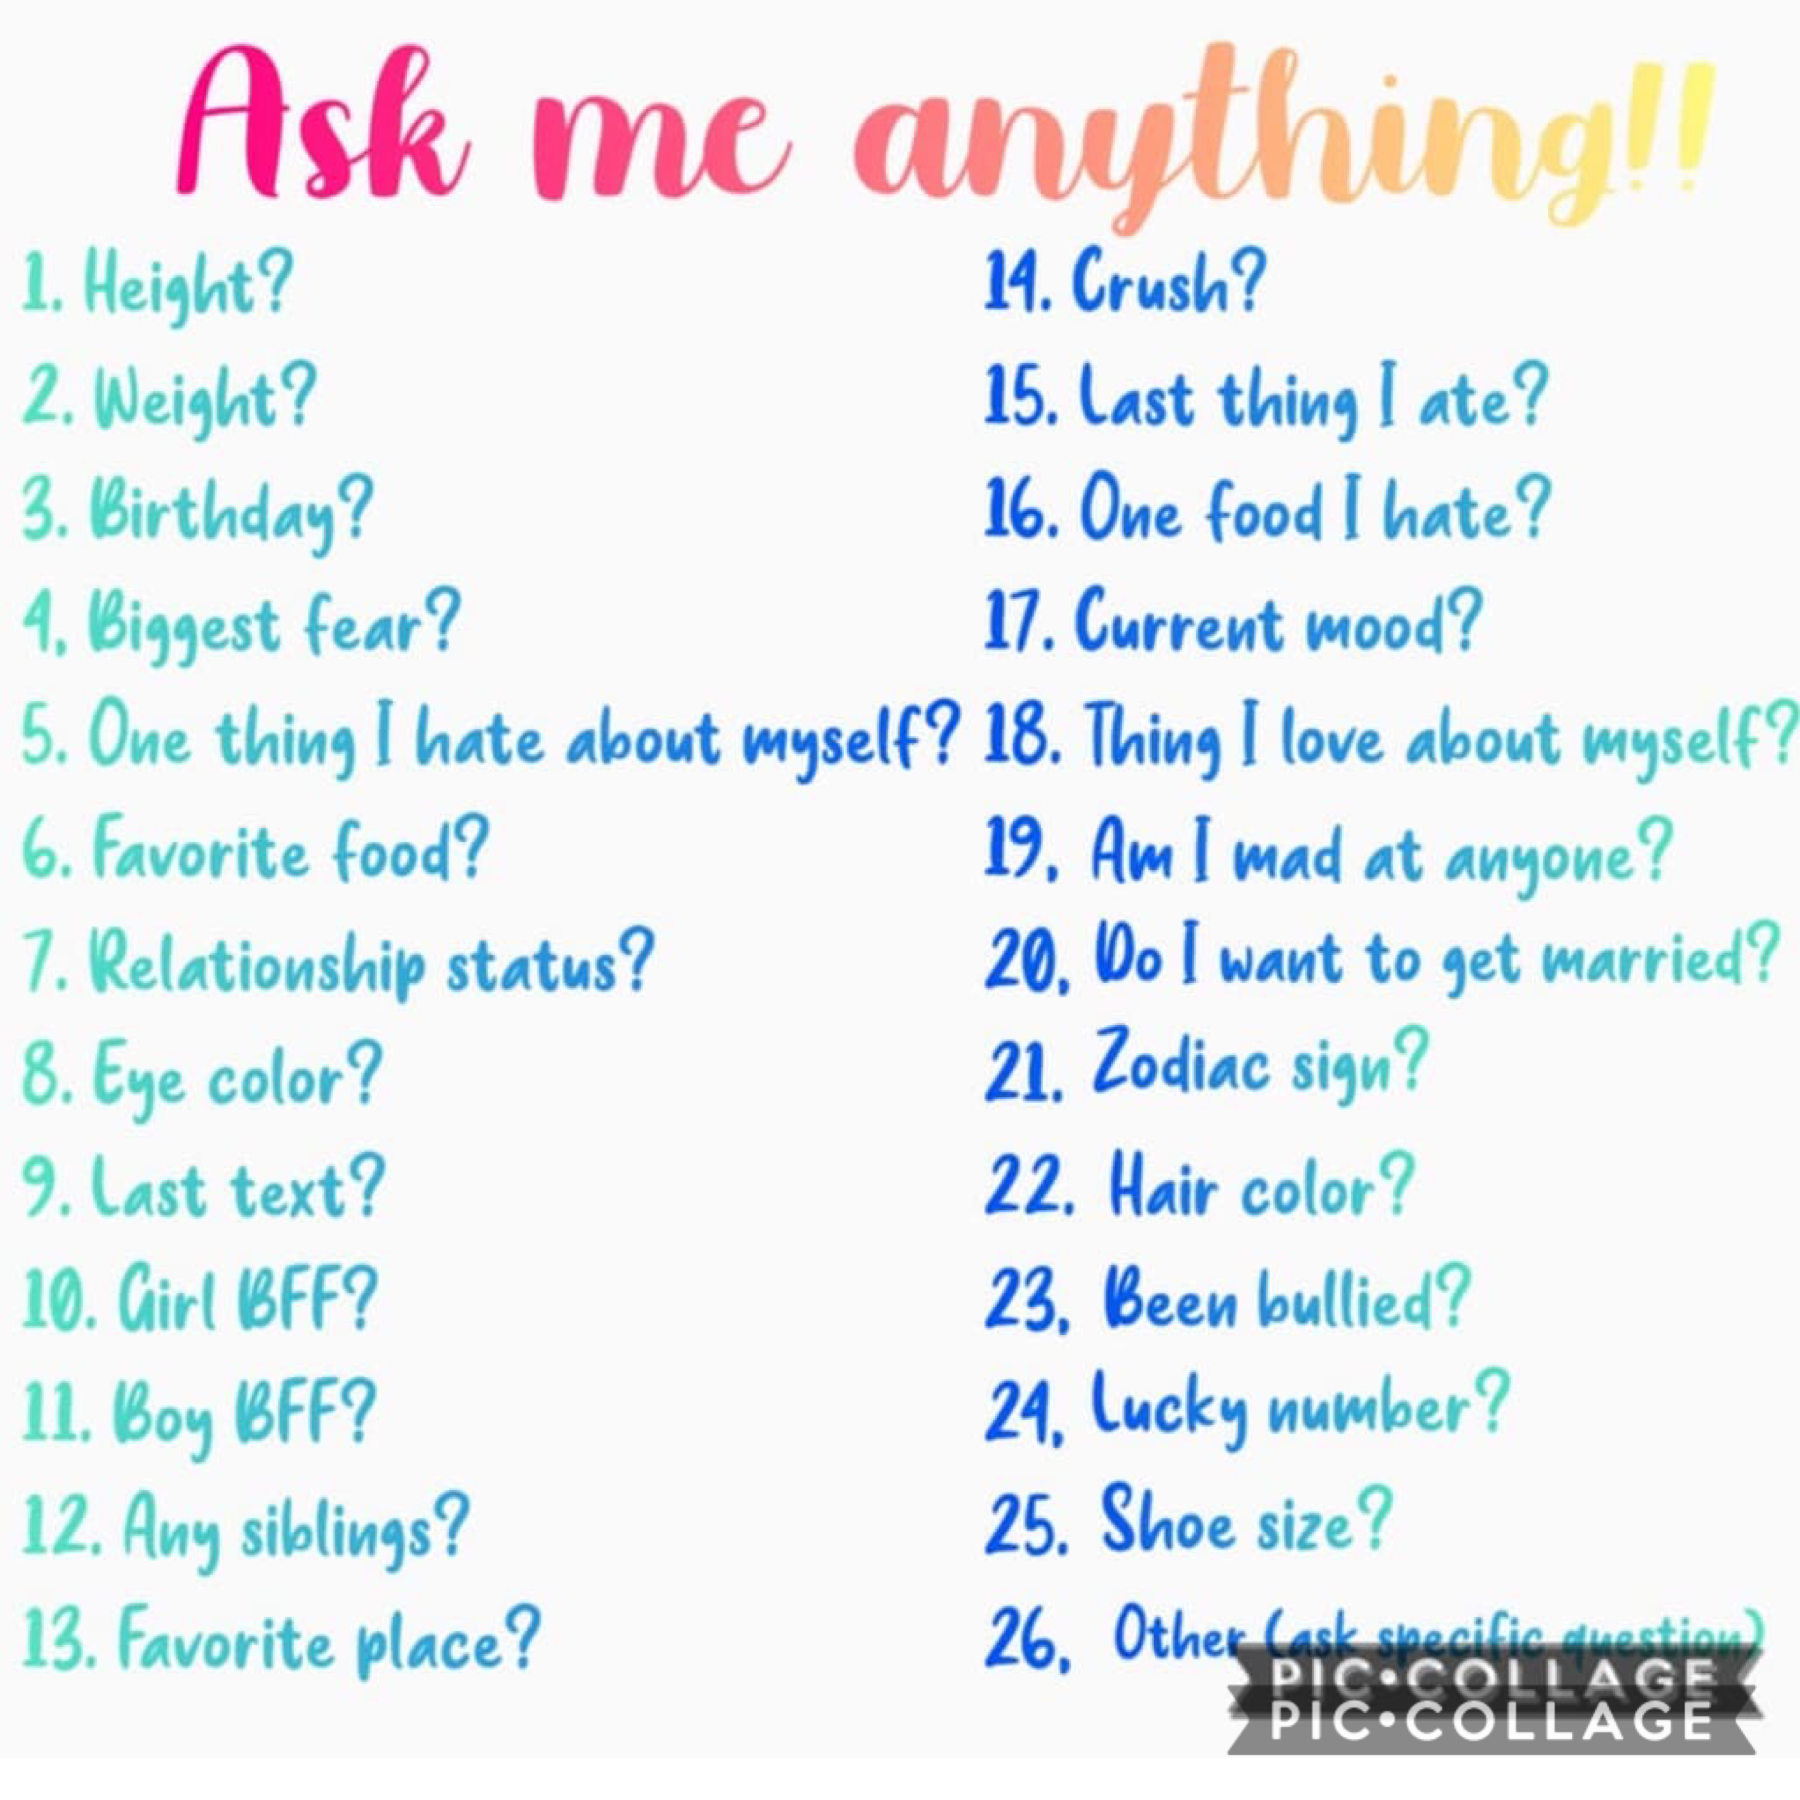 feel free to ask me any of these questions along with any others!! (as long as they are appropriate.....and if I don’t feel comfortable, I’m gonna say no!)